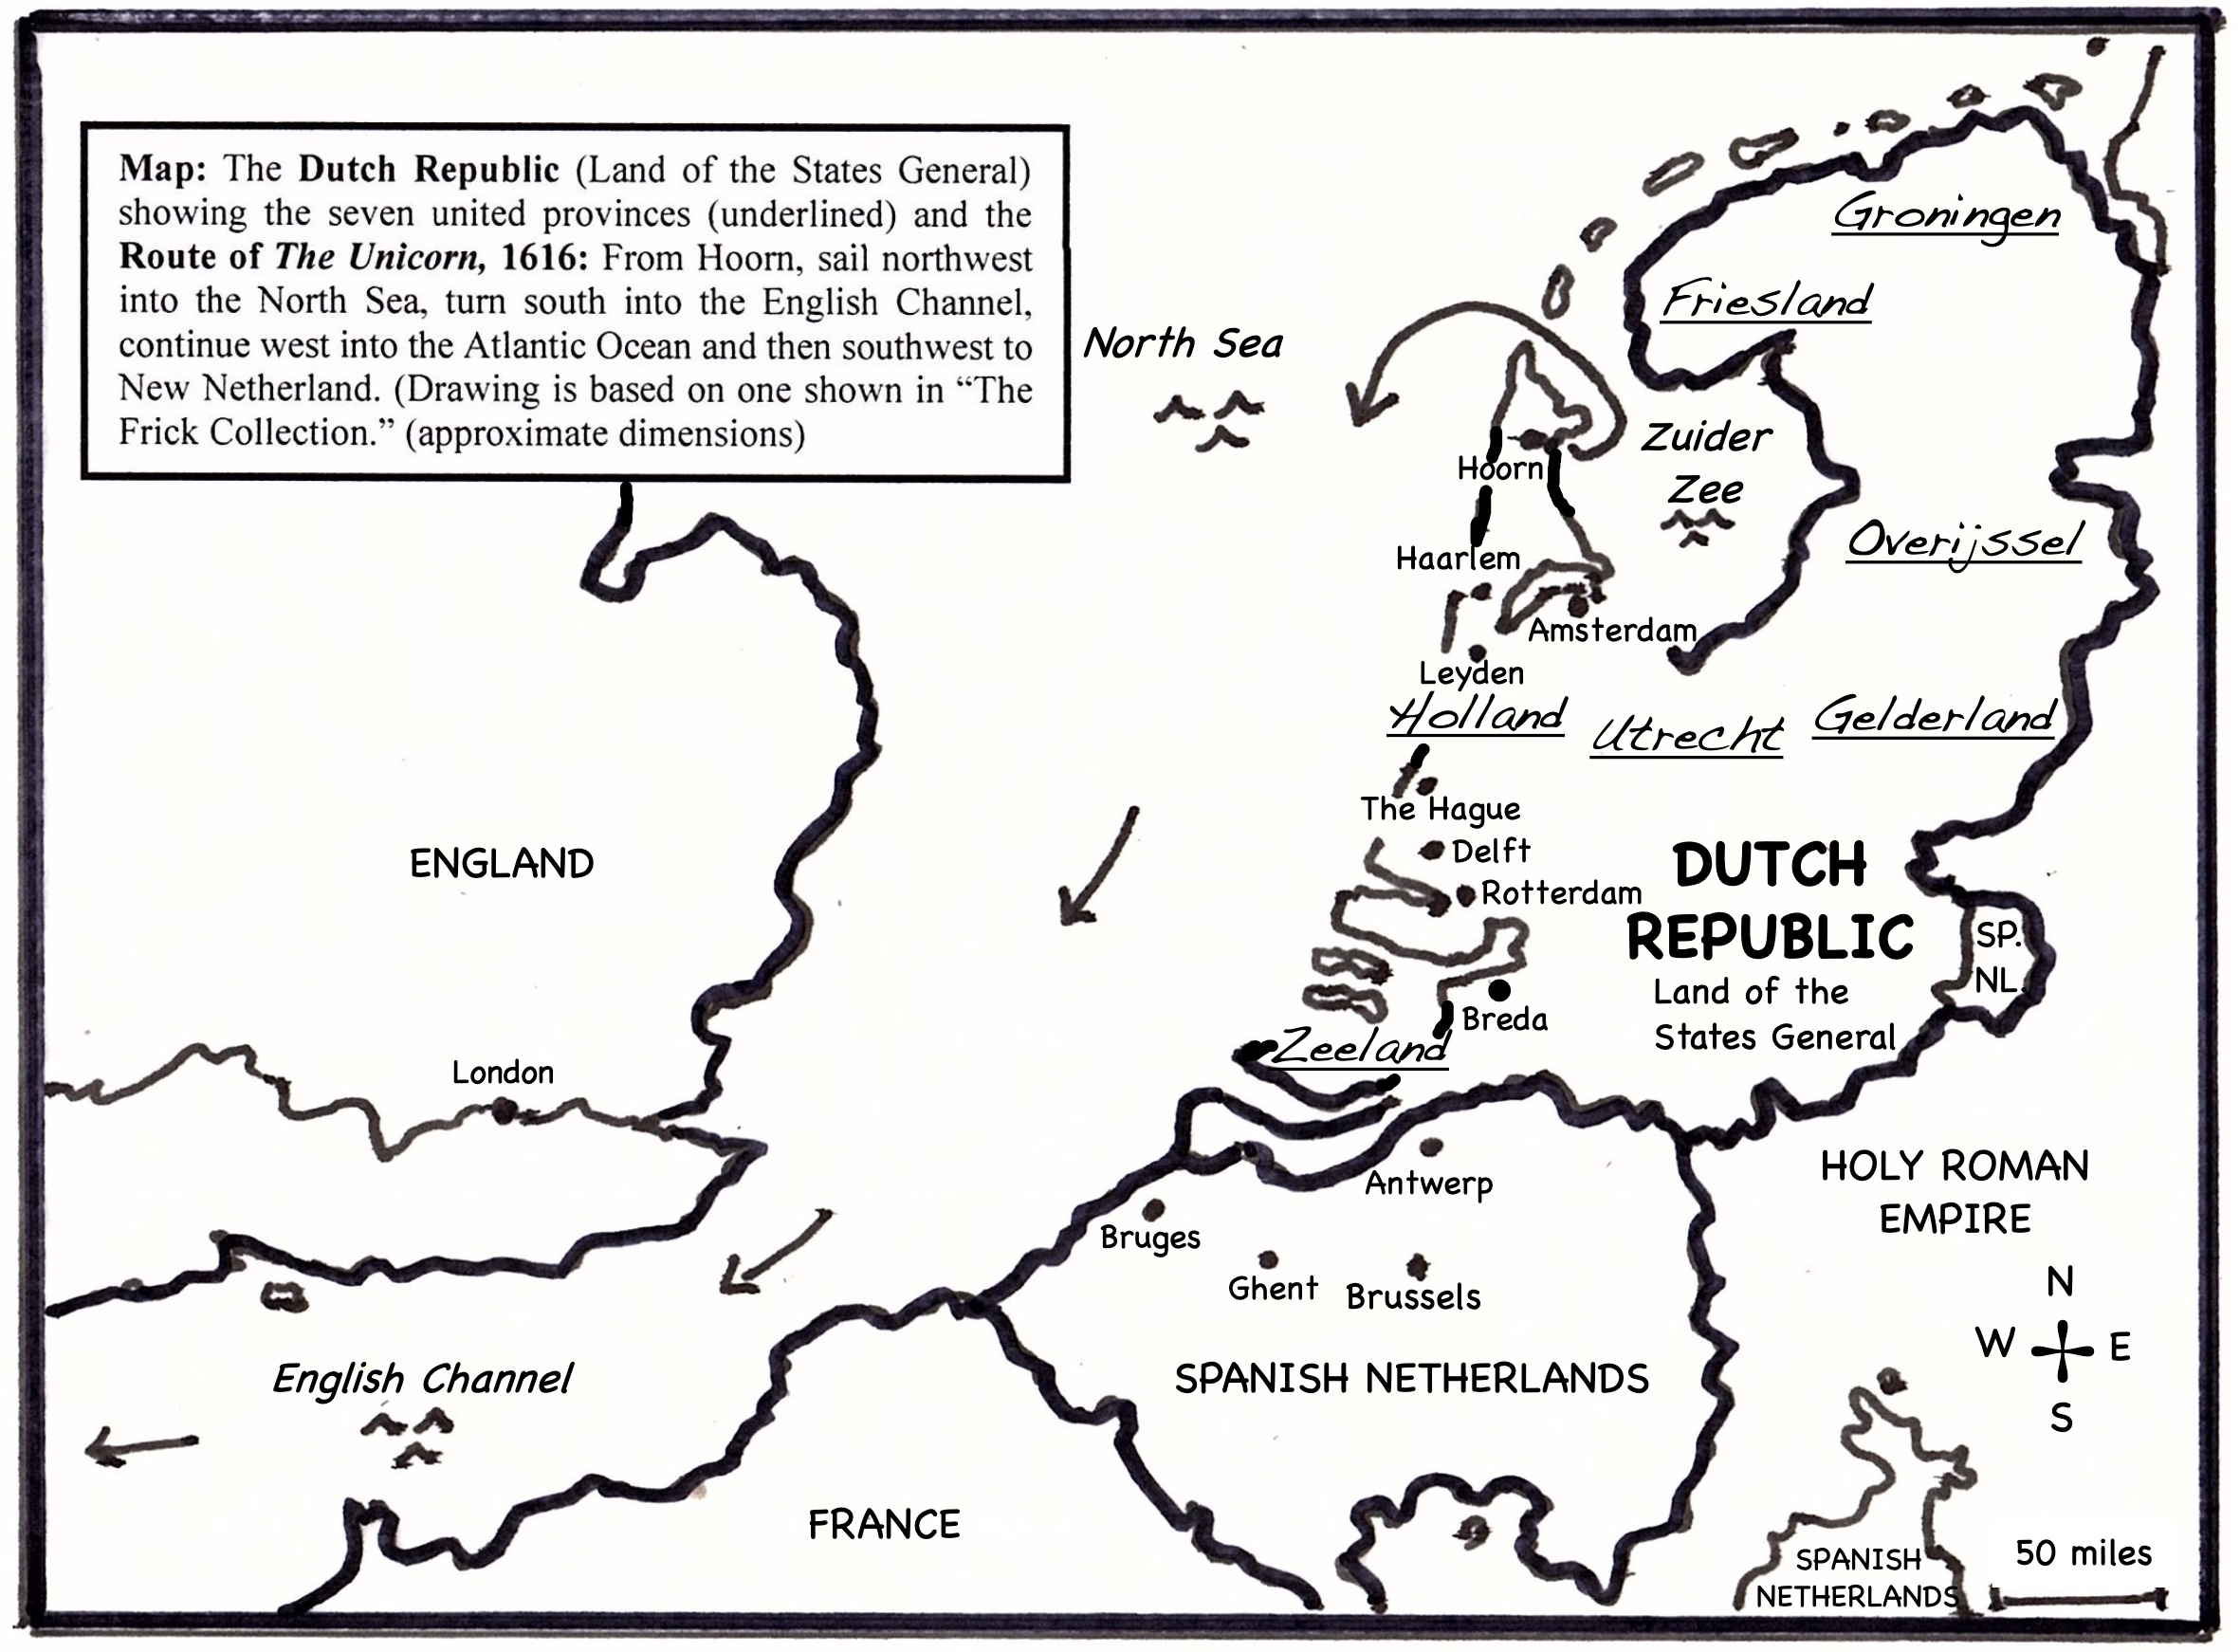 Route of the Unicorn, 1616